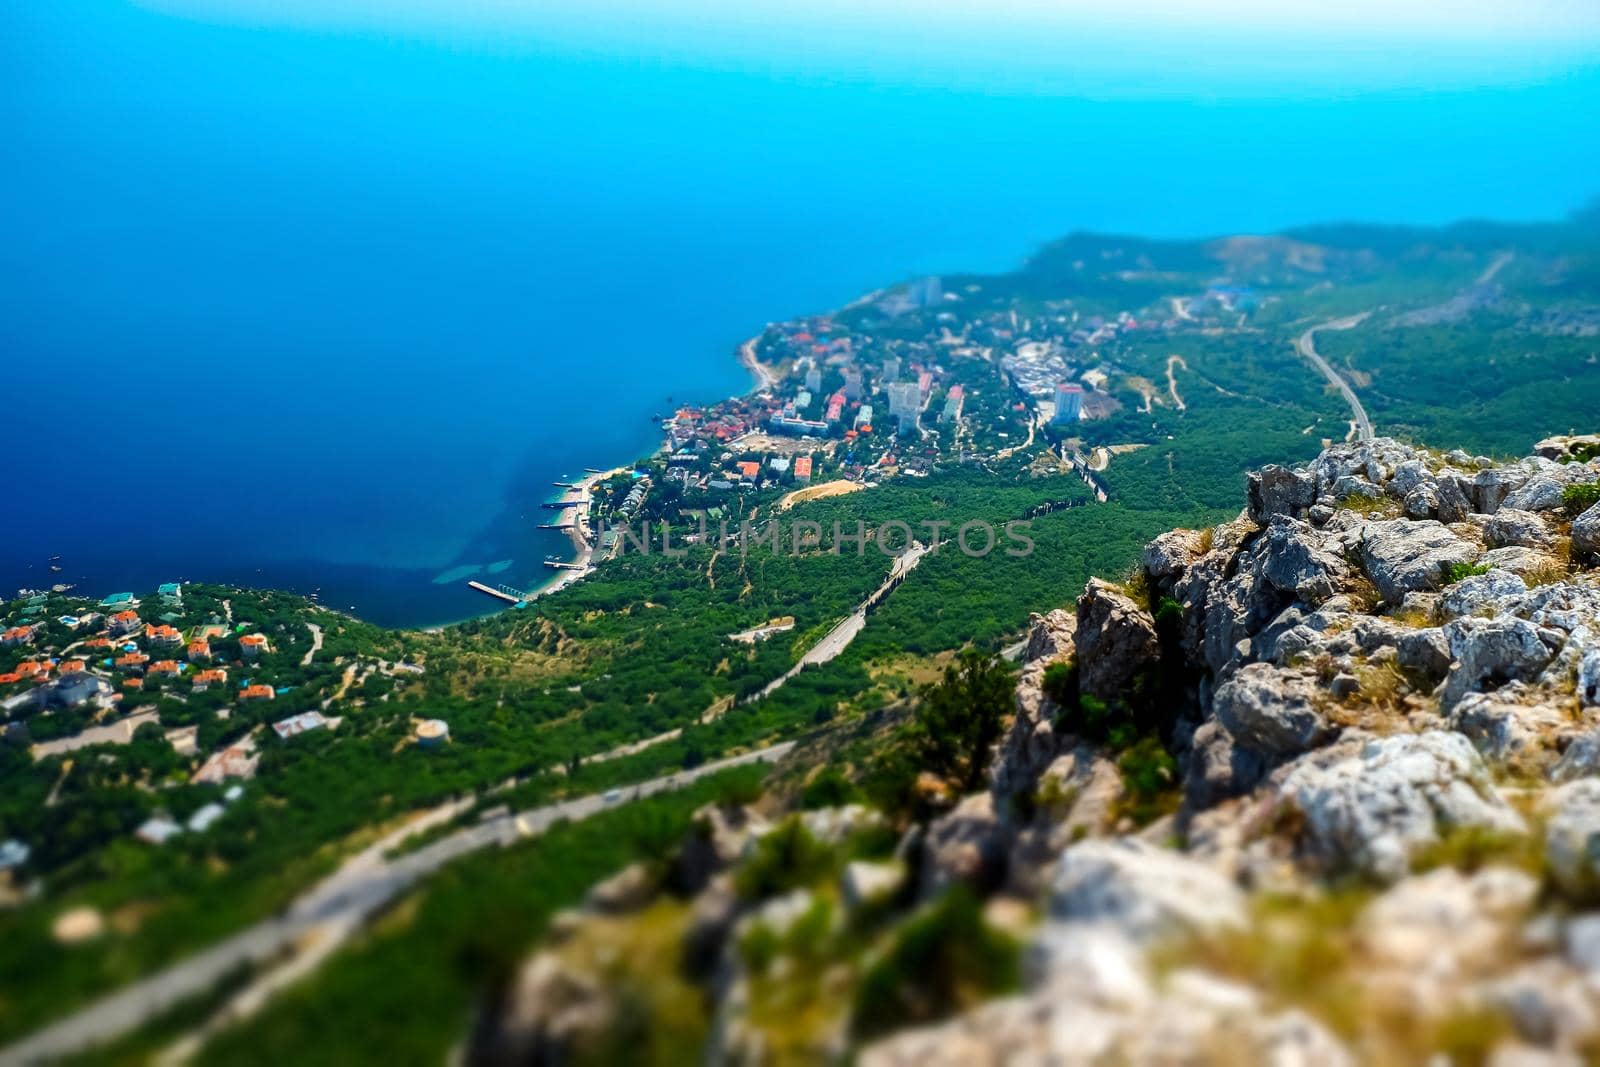 View of the South Coast Highway from the height of the Yalta Yaila in Crimea.